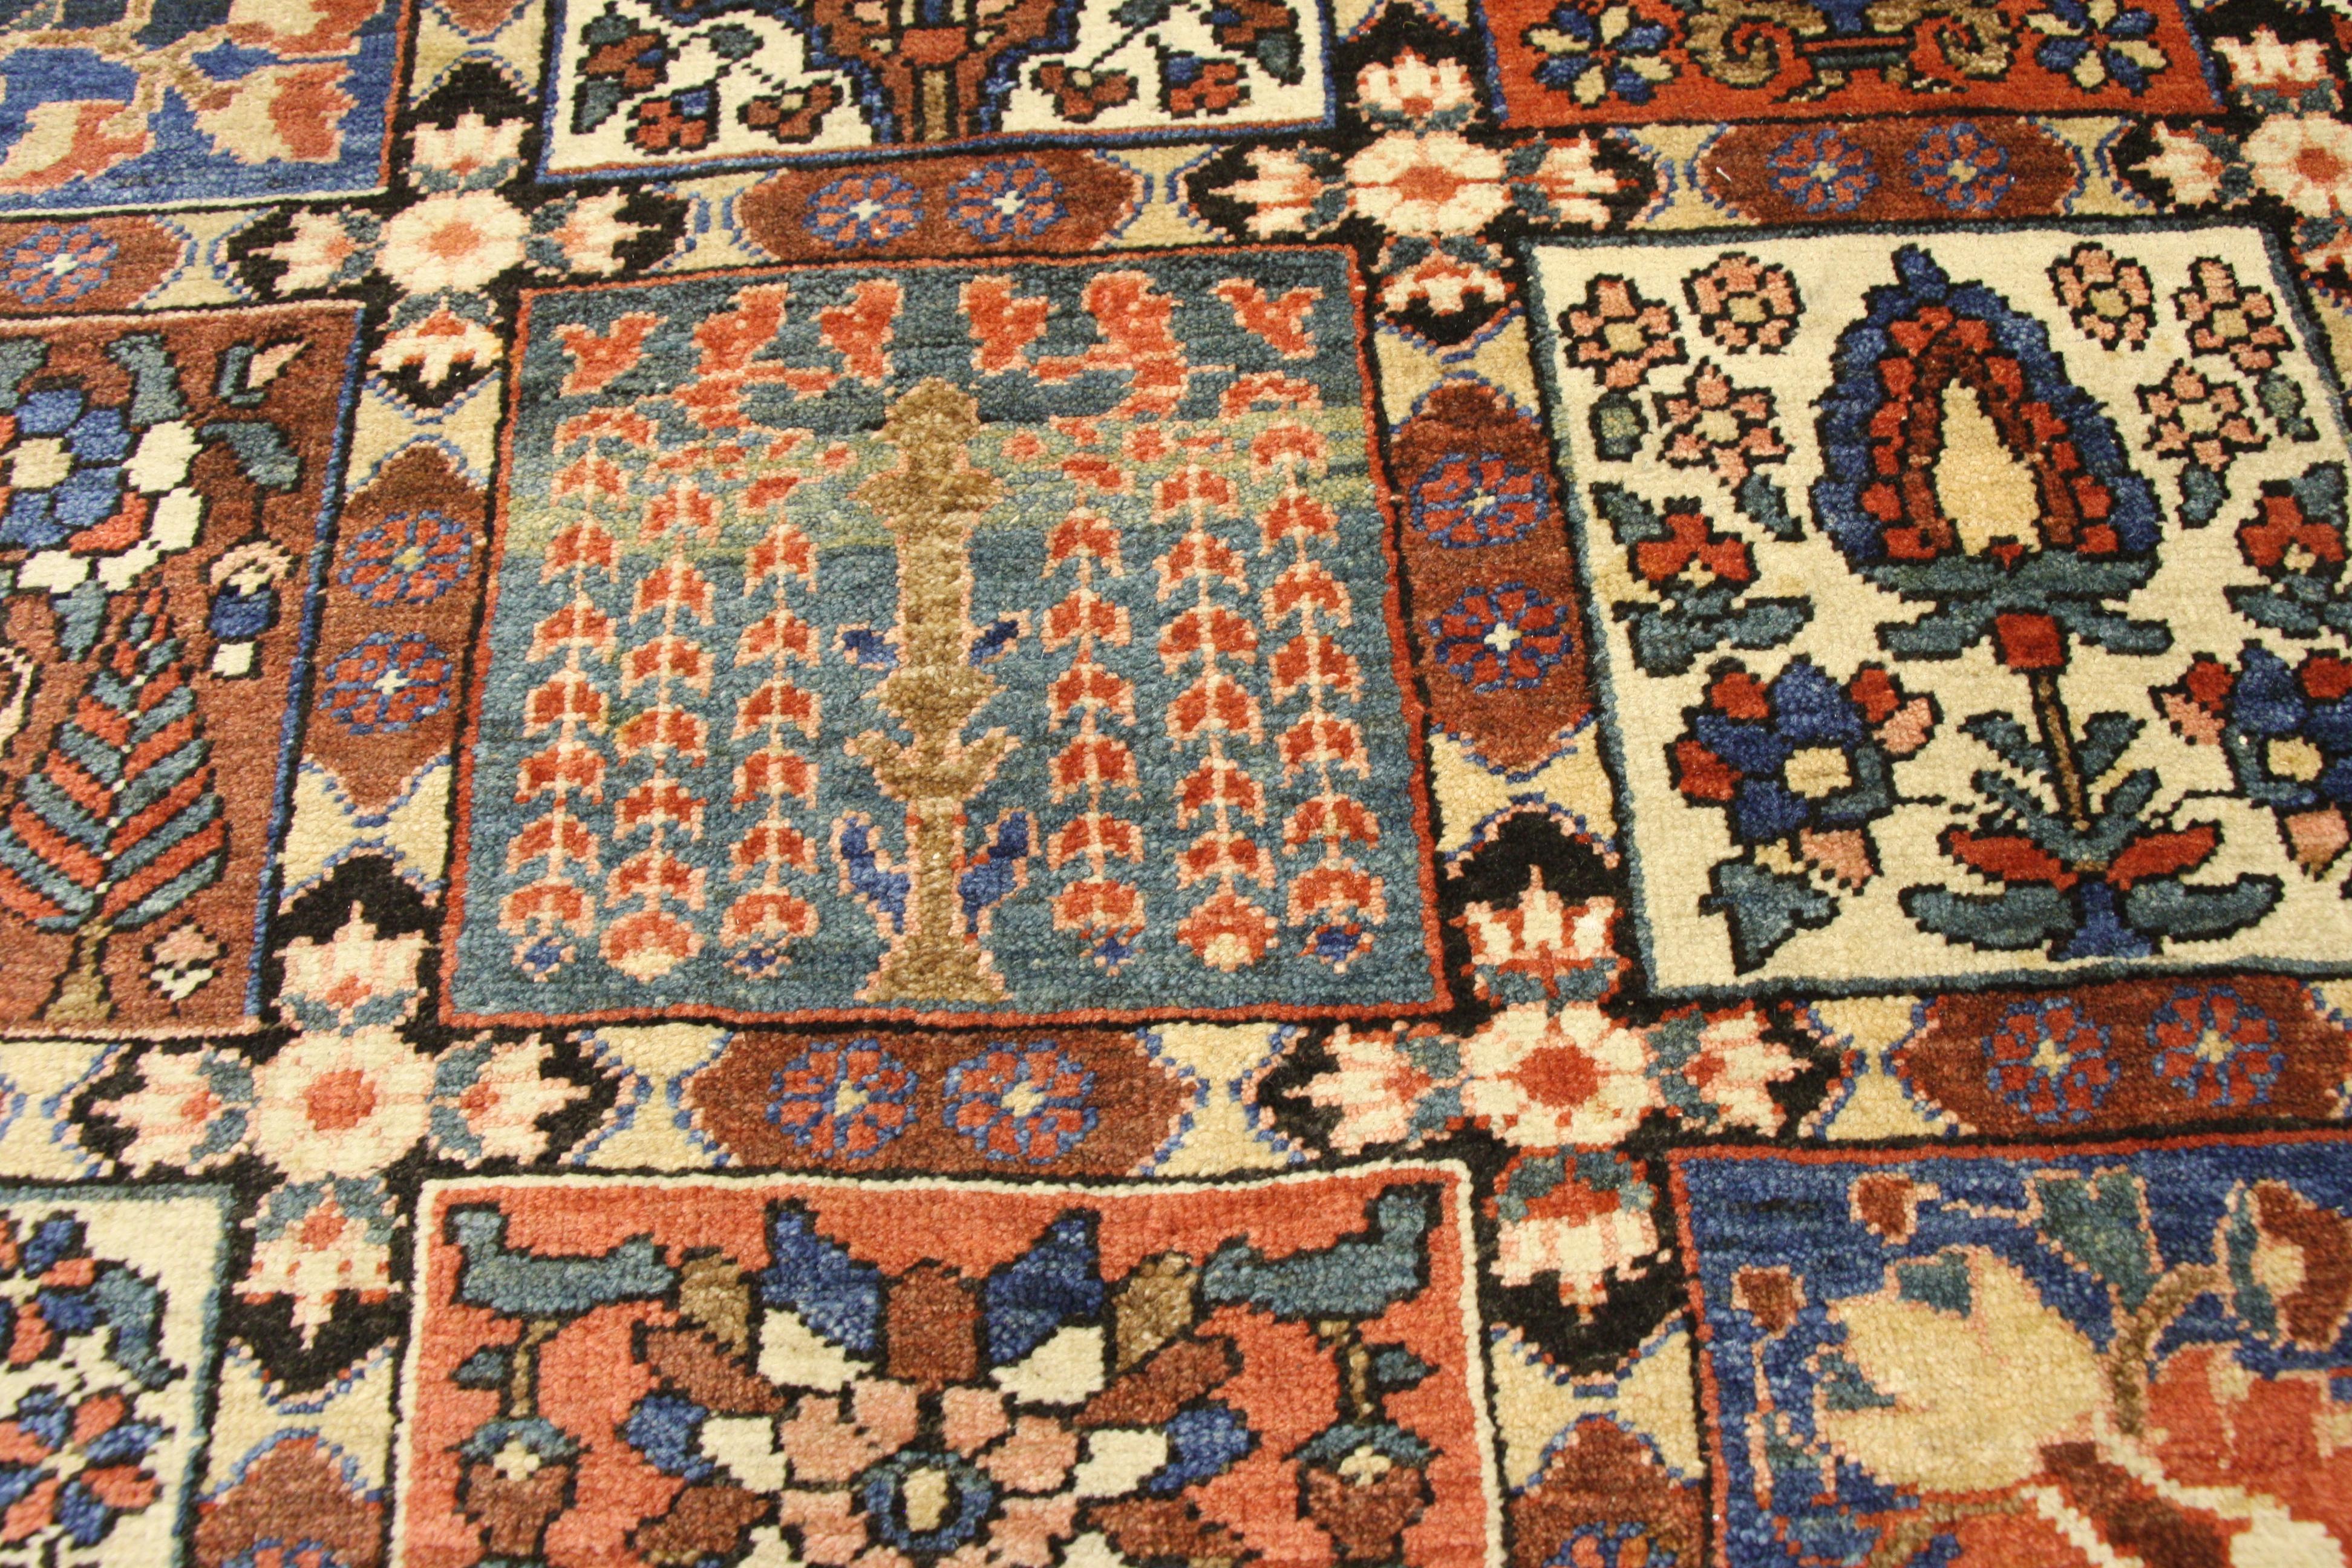 Rustic Style Antique Persian Bakhtiari Rug with Four Seasons Garden Design In Good Condition For Sale In Dallas, TX